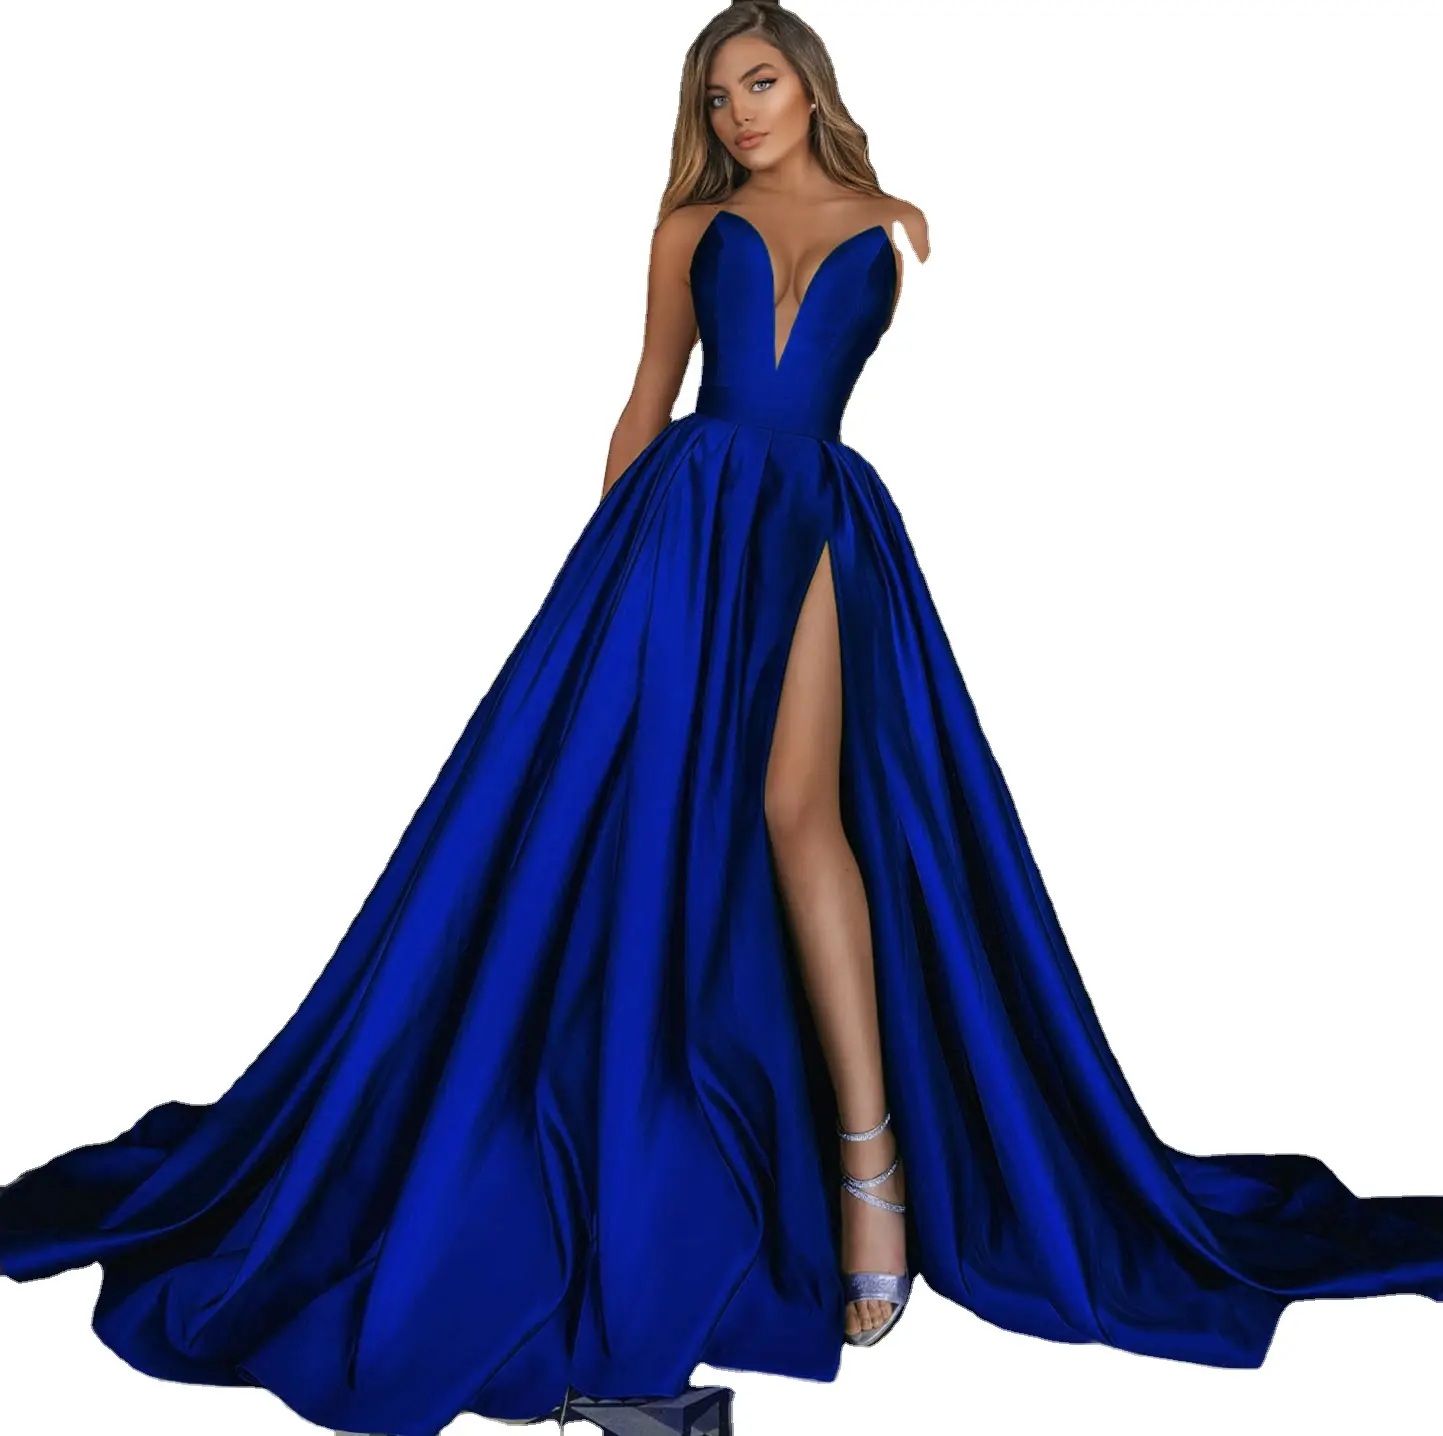 ZC00519 Backless Solid Color Sleeve Maxi Dress Women wedding dress bridal gown With Slit Sexy Elegant Woman Evening Dresses